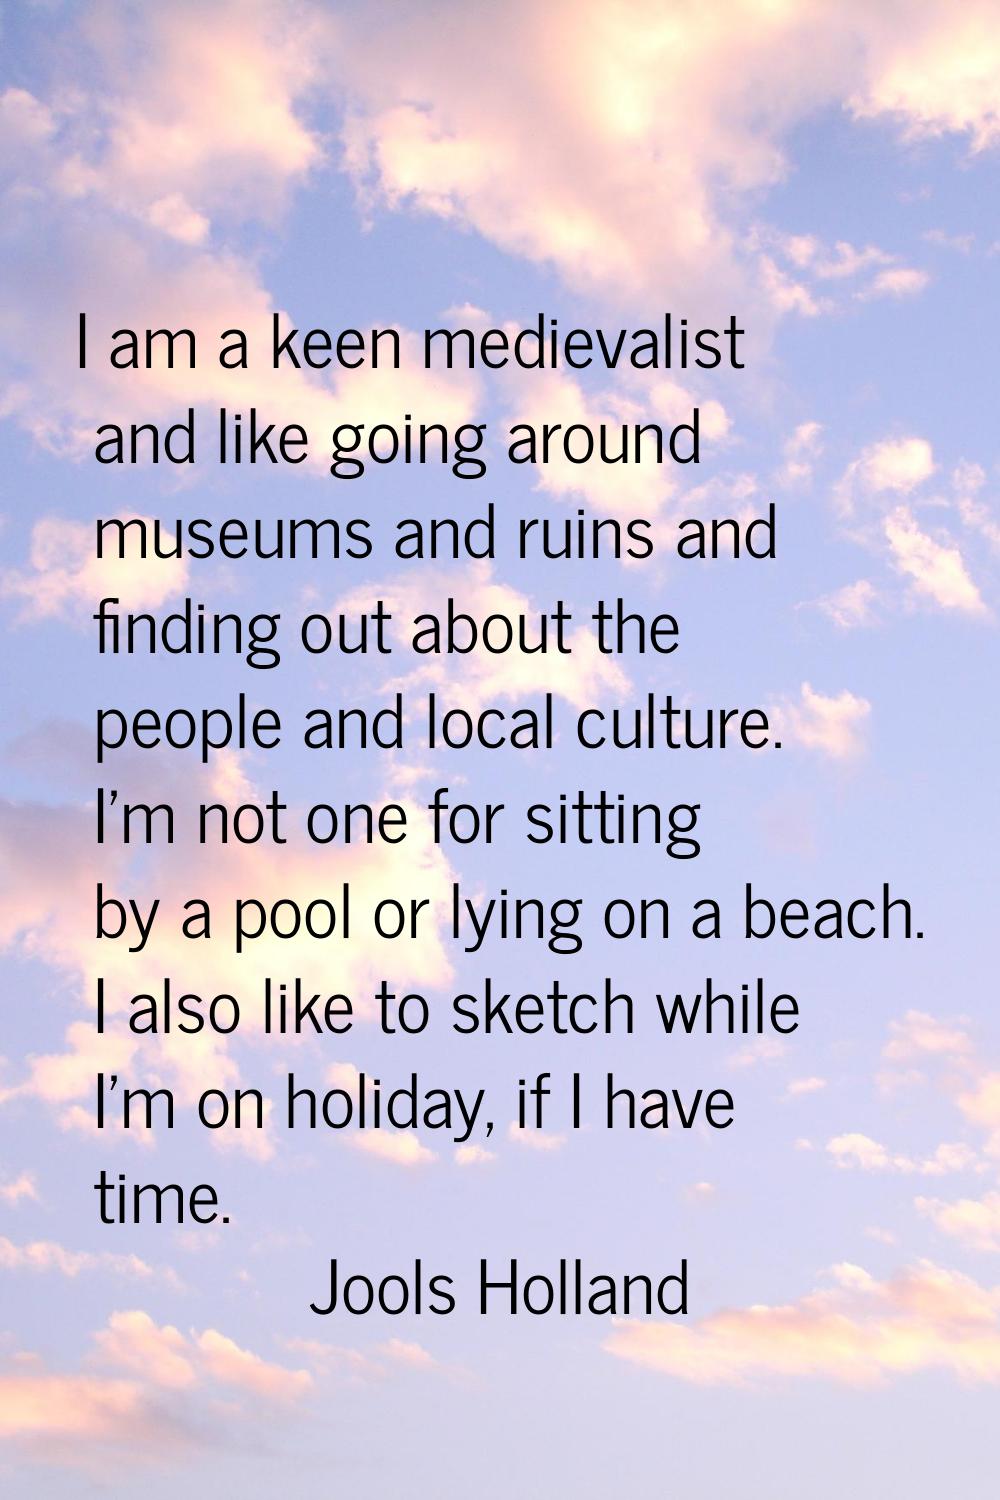 I am a keen medievalist and like going around museums and ruins and finding out about the people an